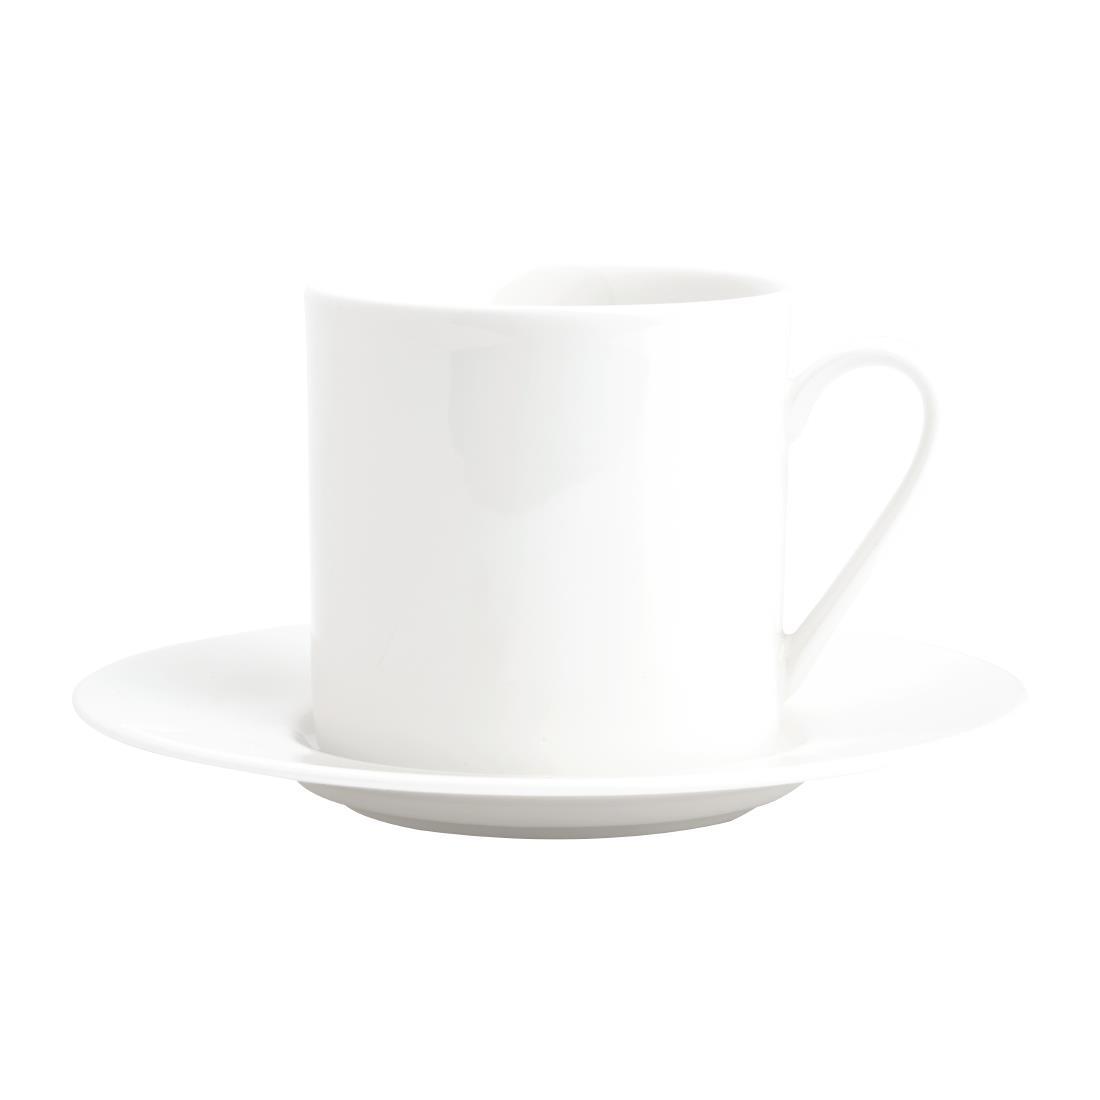 Royal Porcelain Maxadura Coffee Cup Saucer 150mm (Pack of 12) - GT906  - 5